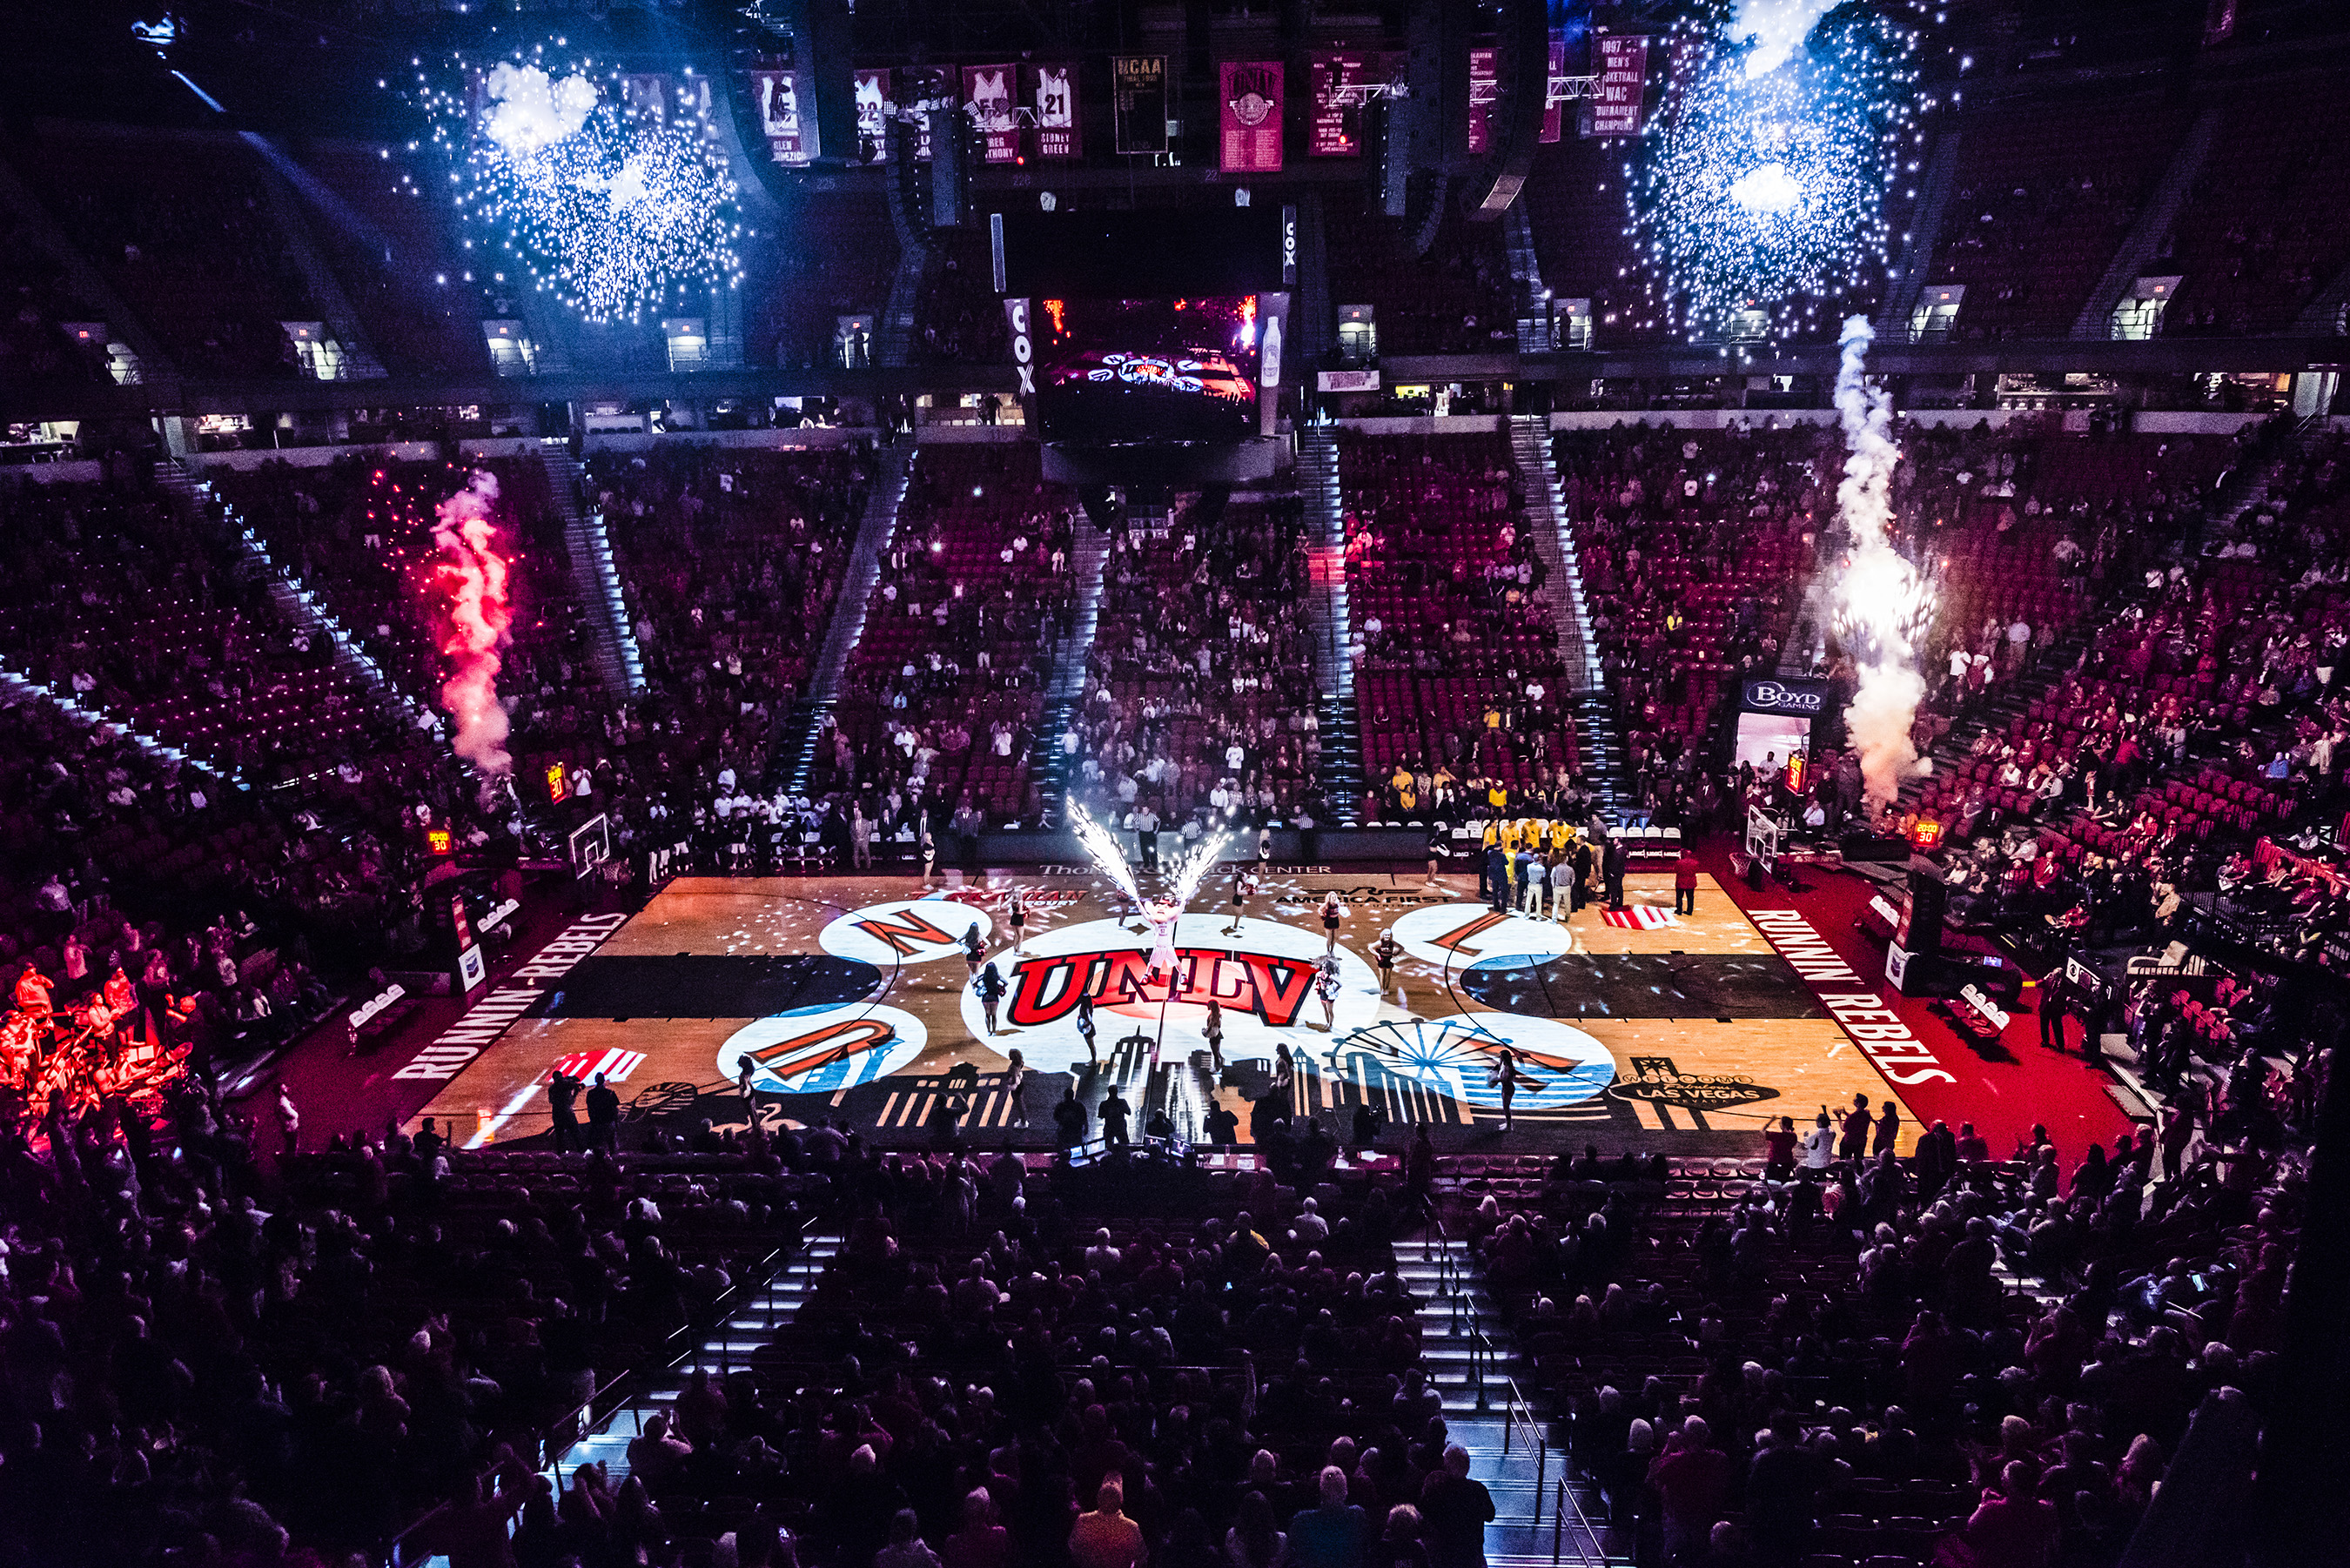 Eight Epson Pro L25000U laser projectors deliver UNLV Runnin’ Rebels fans that wow-factor experience with the ultimate projection mapping display